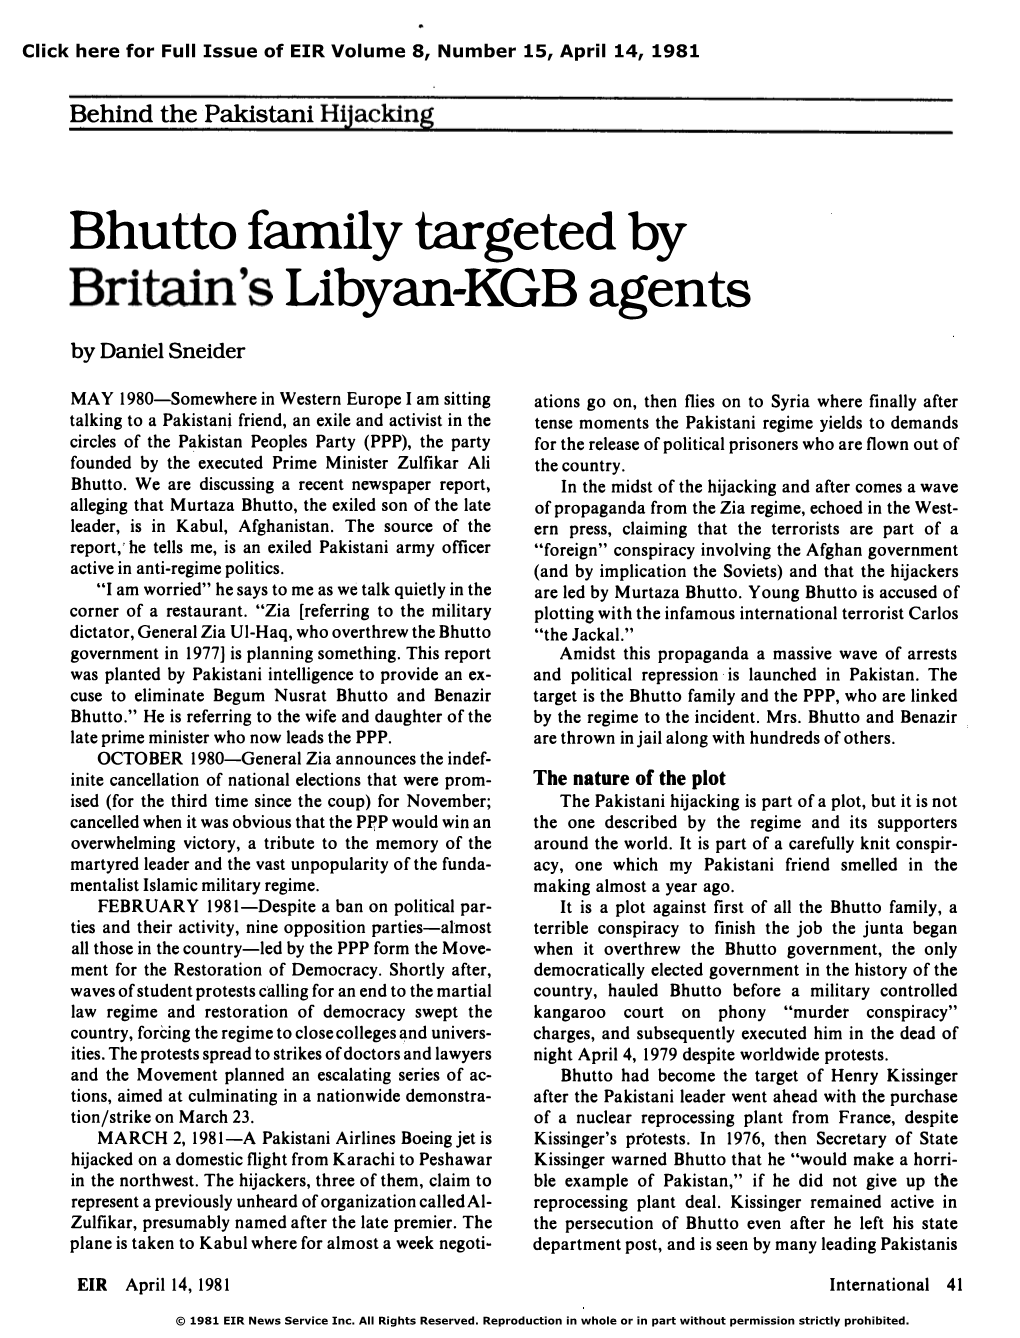 Bhutto Family Targeted by Britain's Libyan-KGB Agents